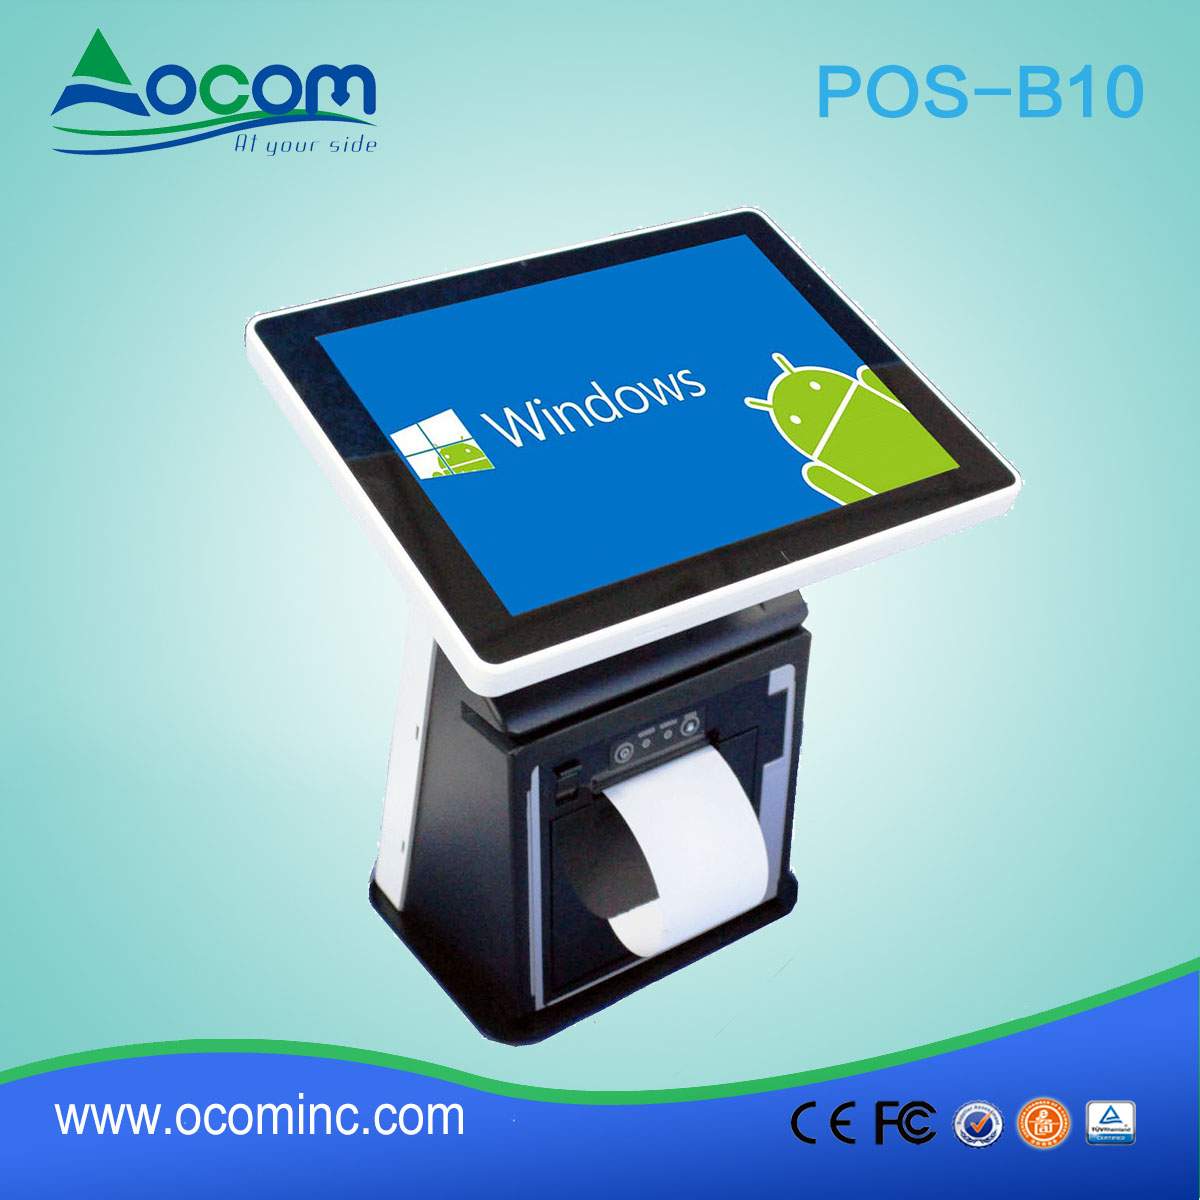 10 "Touch Dual Screen All in One POS fabricant avec Android ou Windows OS en option"